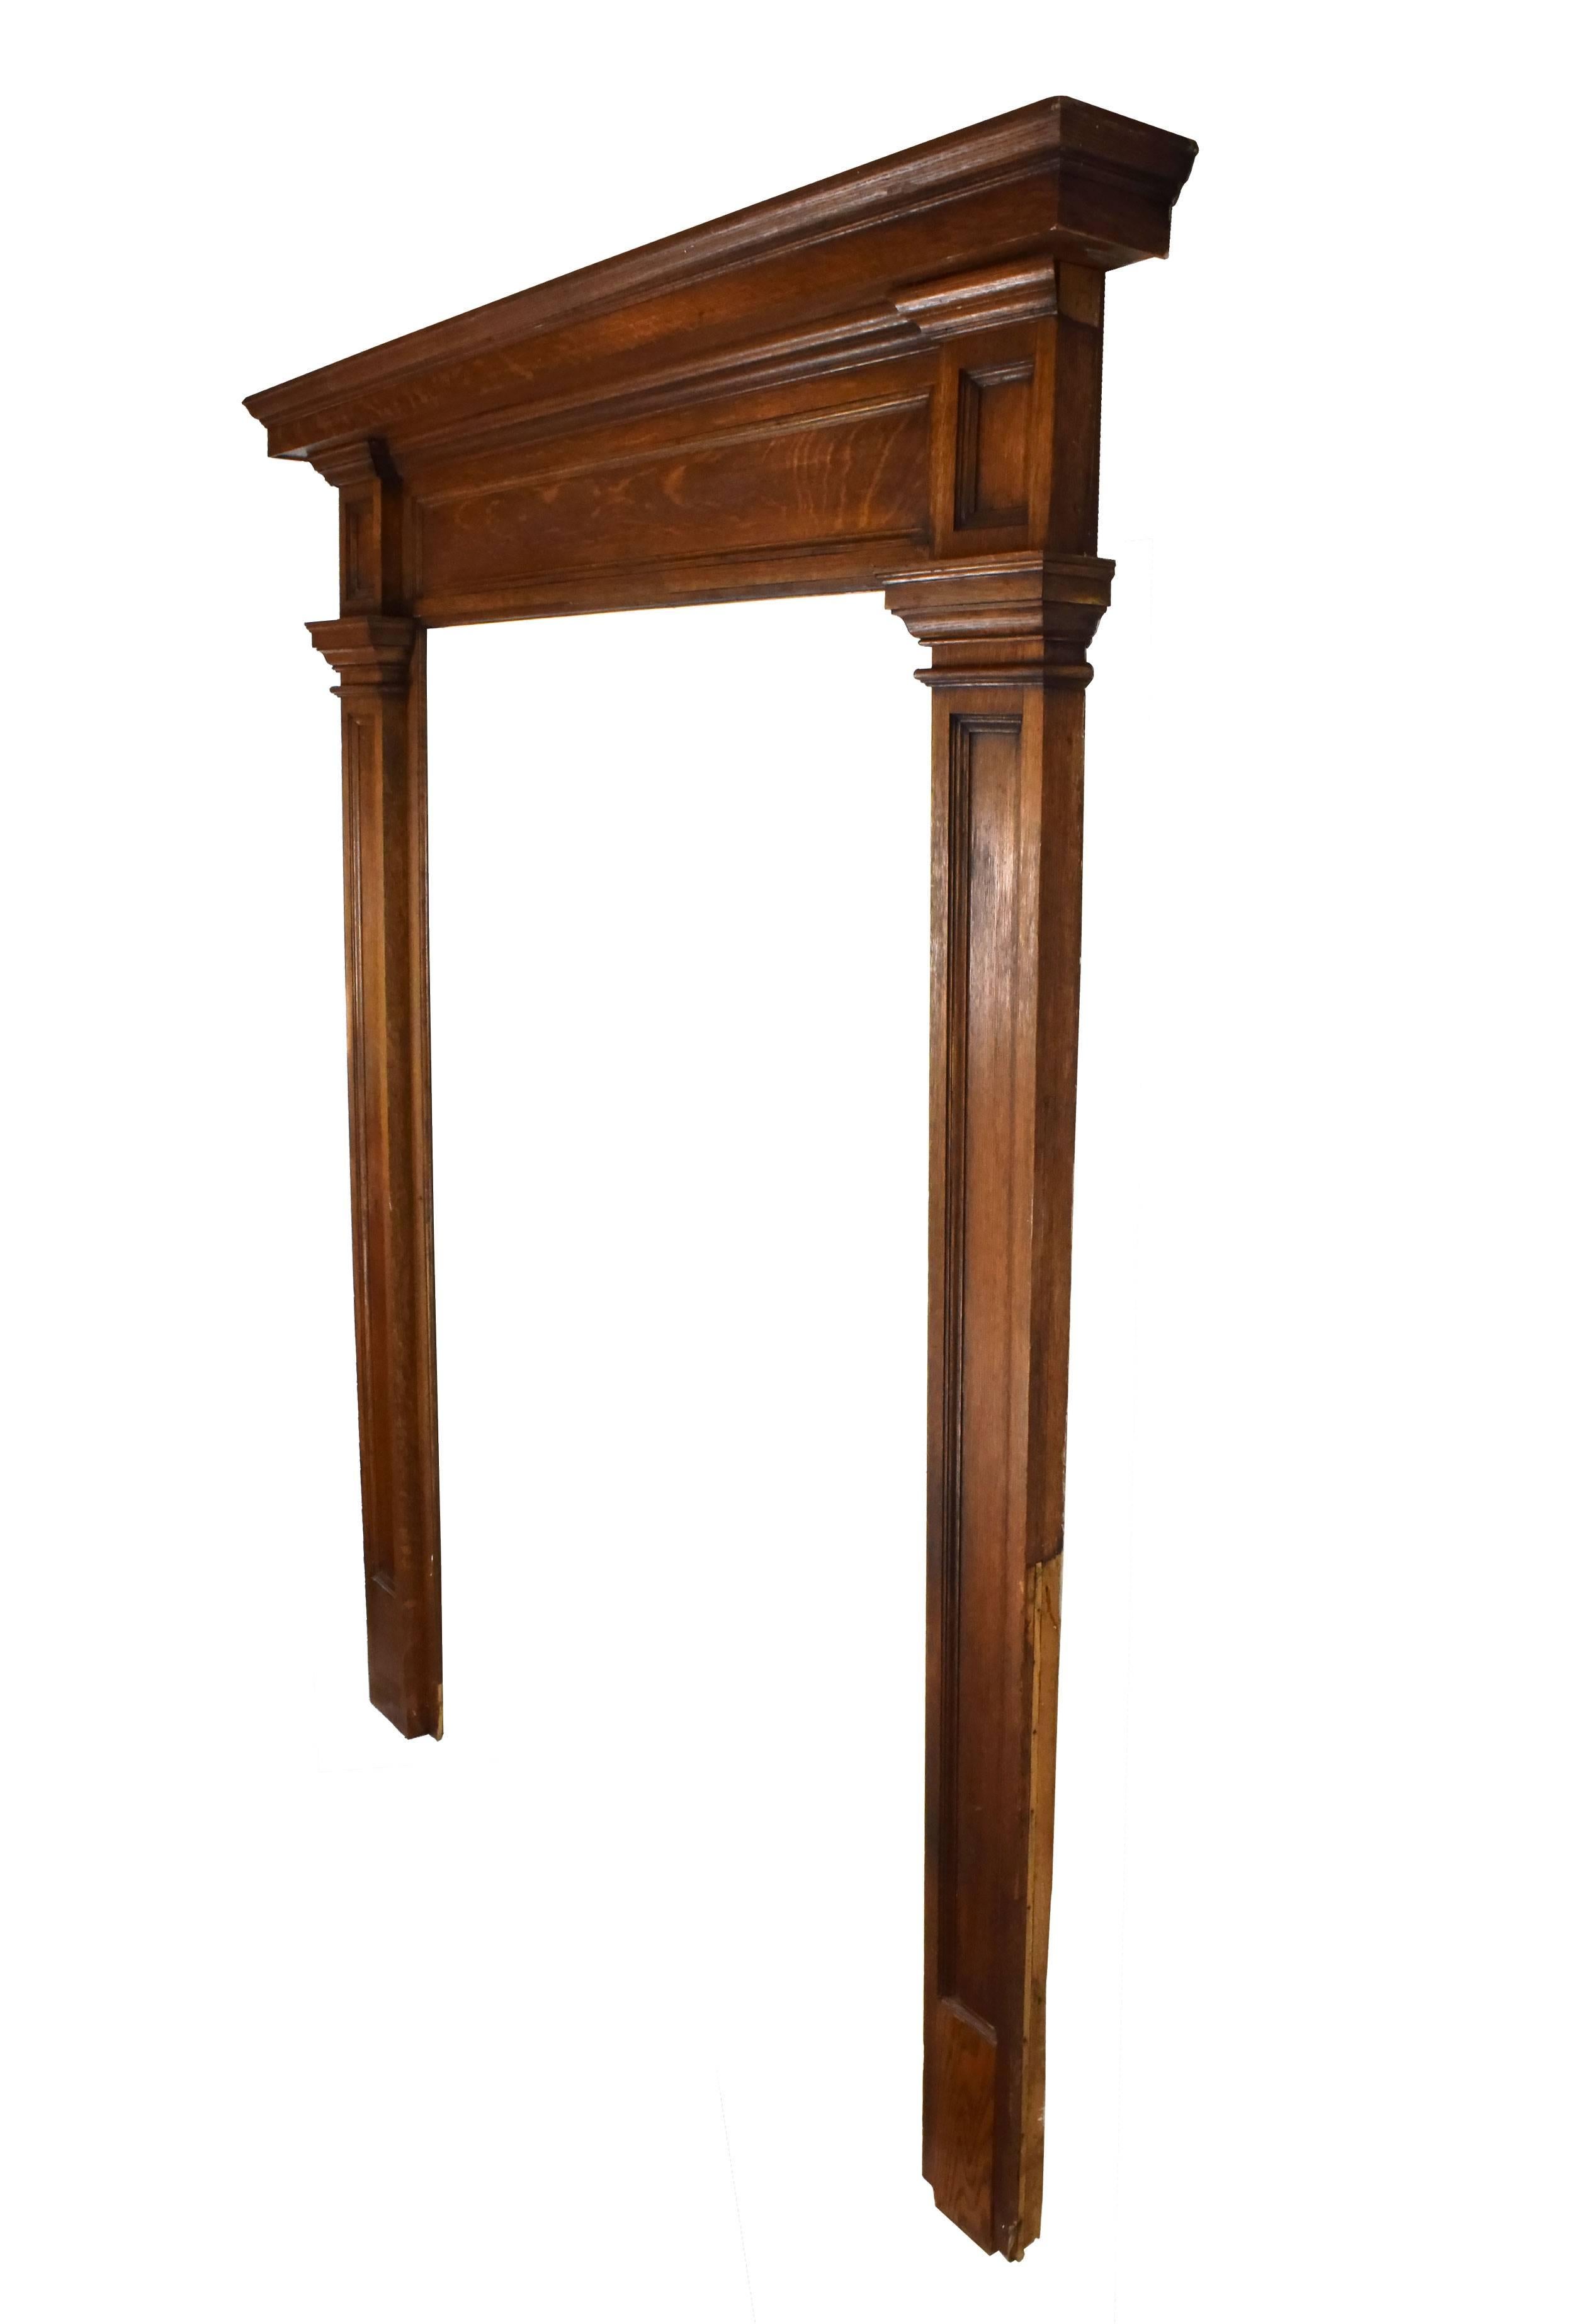 This oak walk through mantel, which stands tall at seven feet, is rich, warm and inviting. Decorative details on the header and legs add further interest to this beautiful piece. Please note that the right-hand plinth block appears to have been